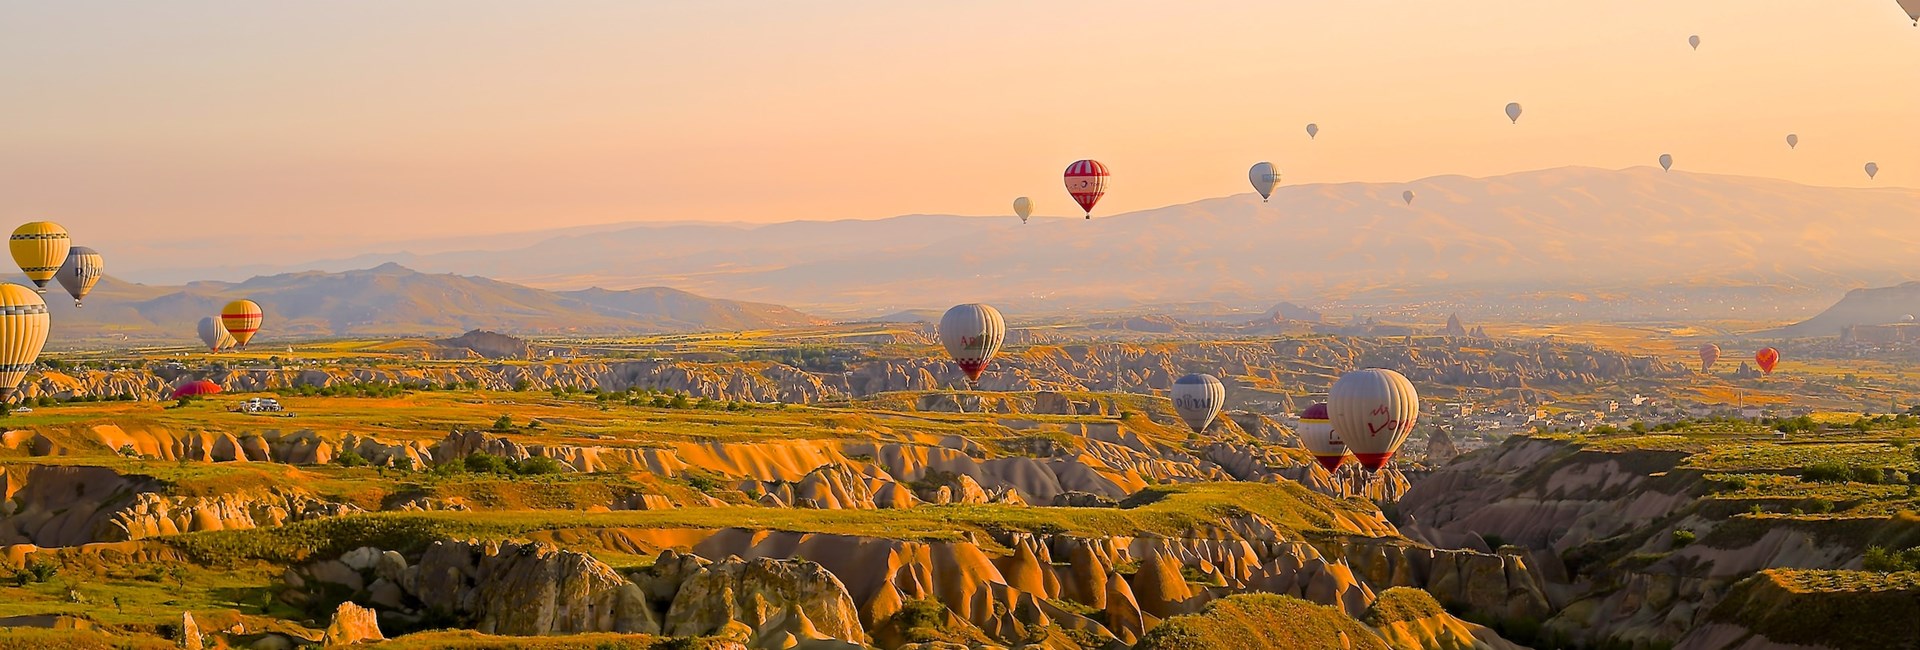 hot air balloons rising over sunflower valley in Turkey